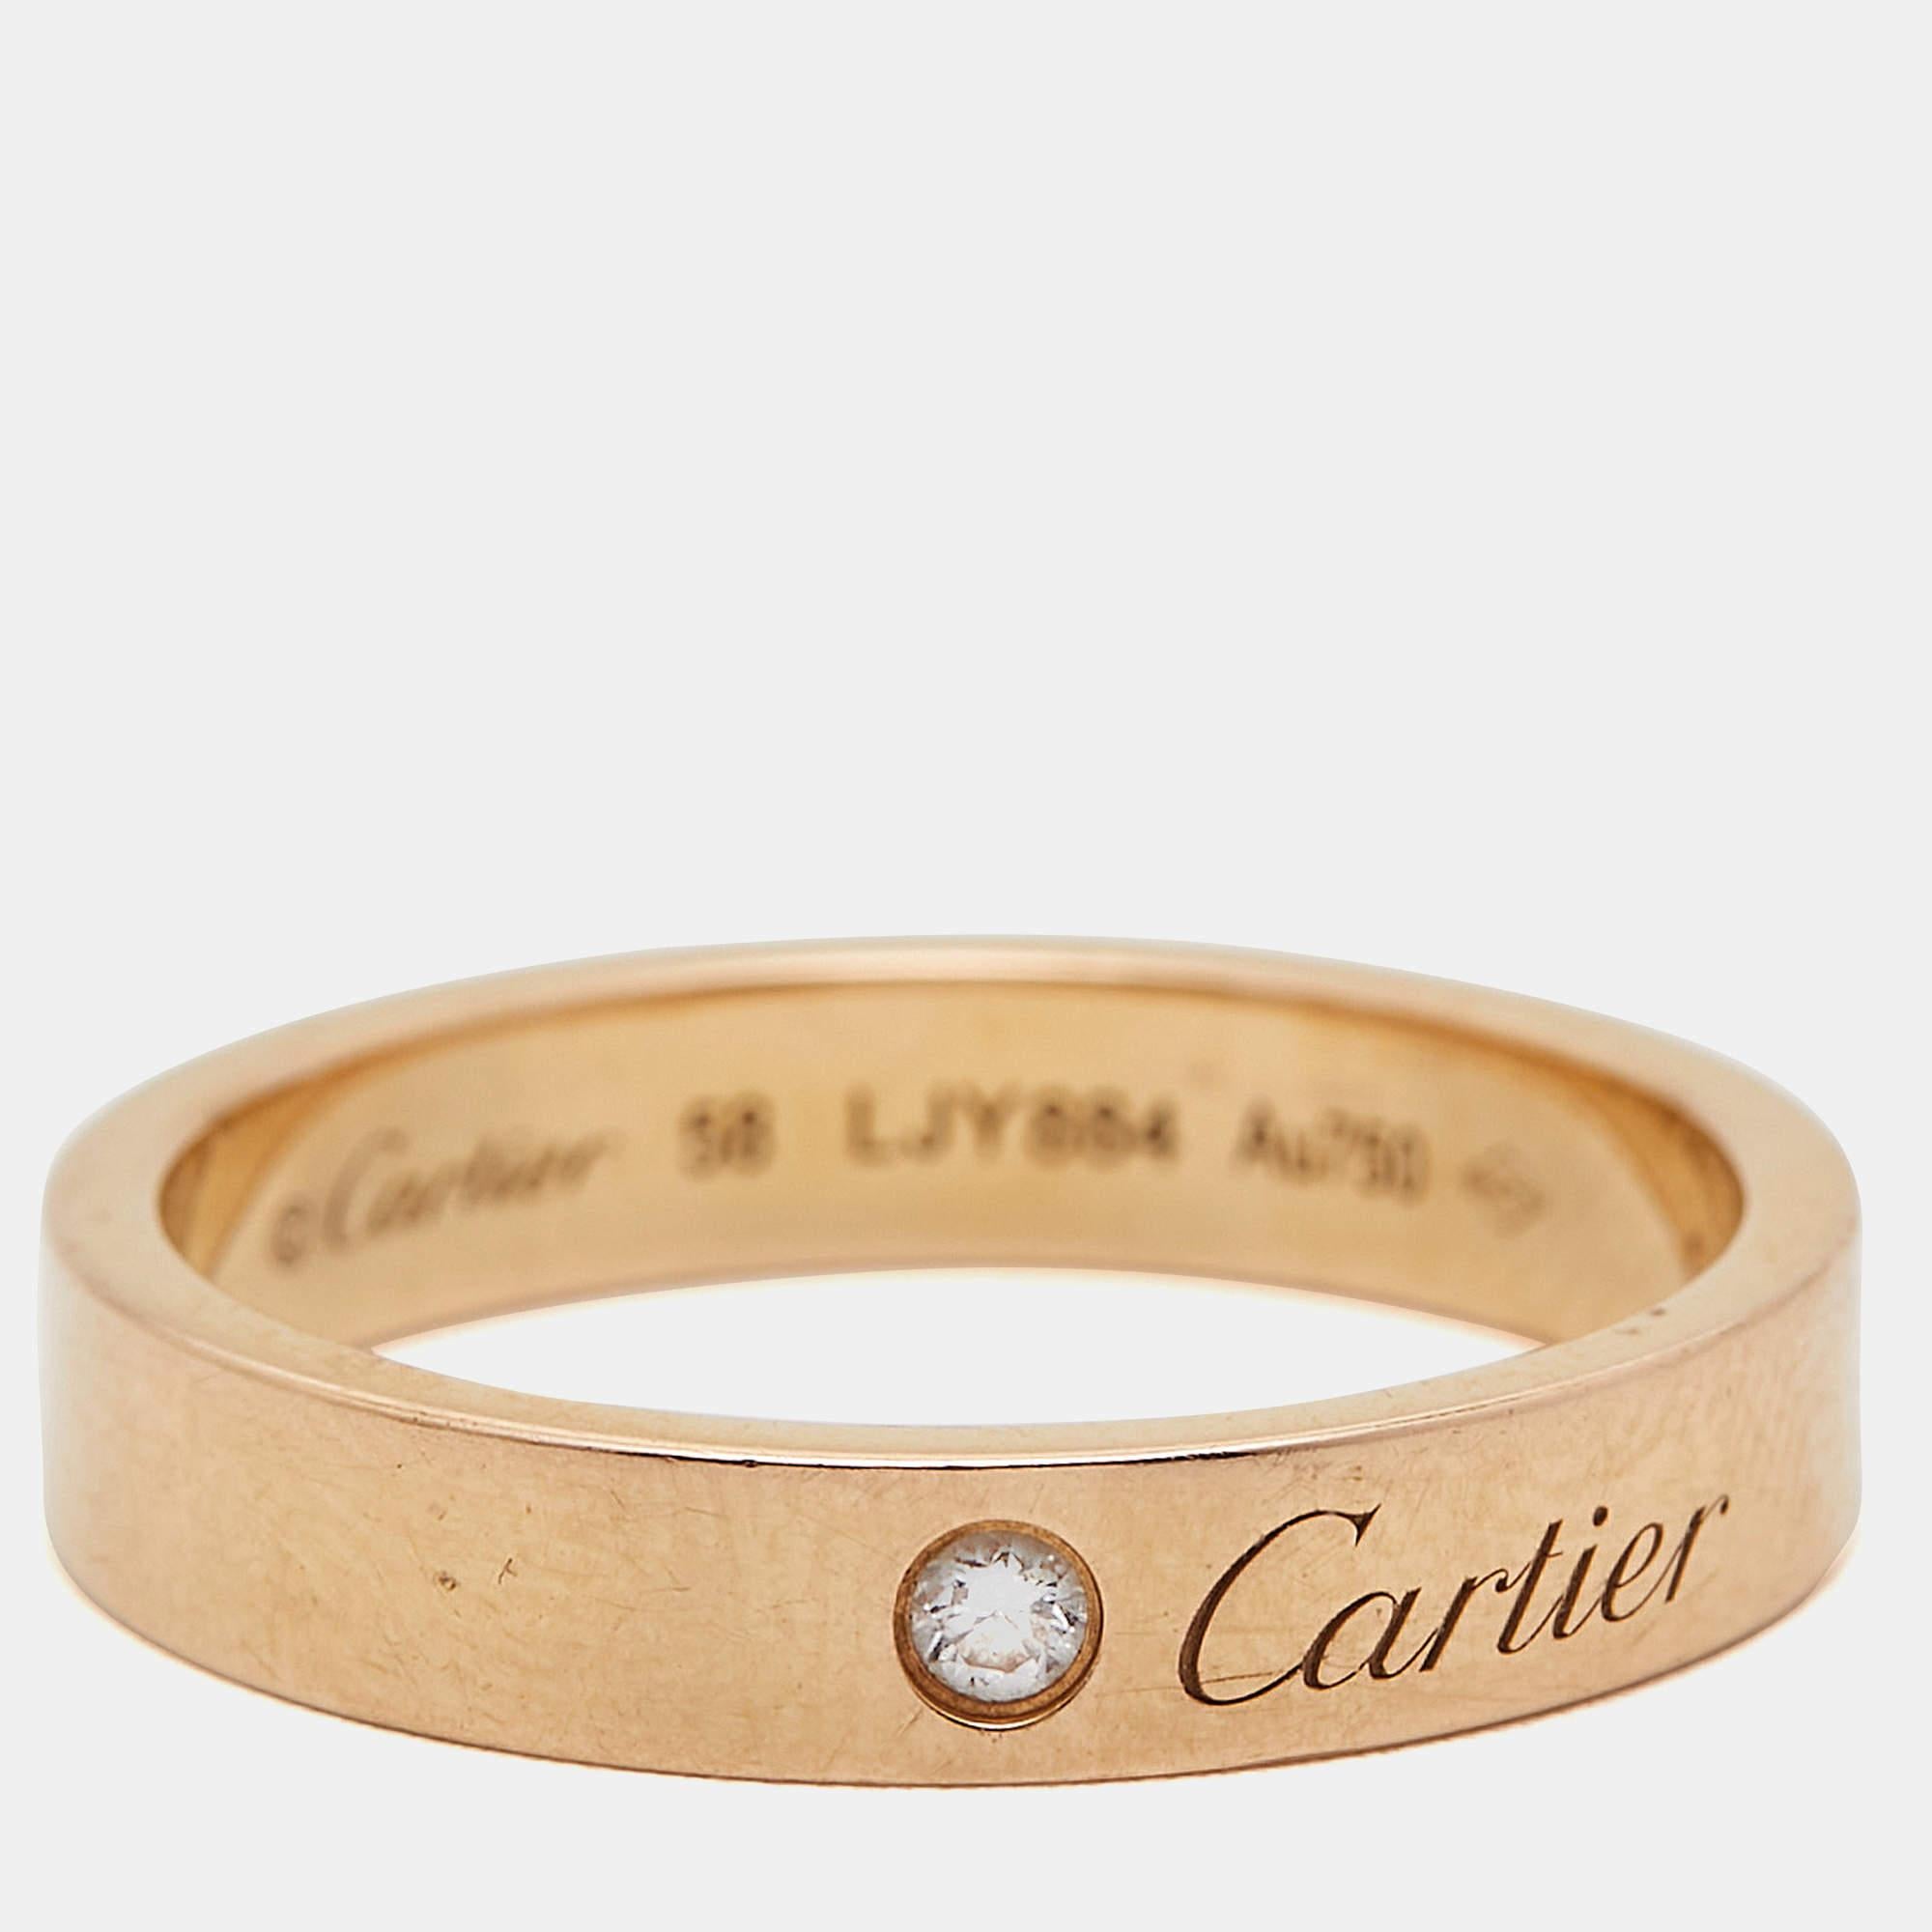 Crafted with exquisite artistry, the Cartier C De Cartier ring epitomizes timeless elegance. A radiant diamond delicately graces the band, set in 18k rose gold, symbolizing enduring love and commitment. This iconic piece seamlessly merges luxury and